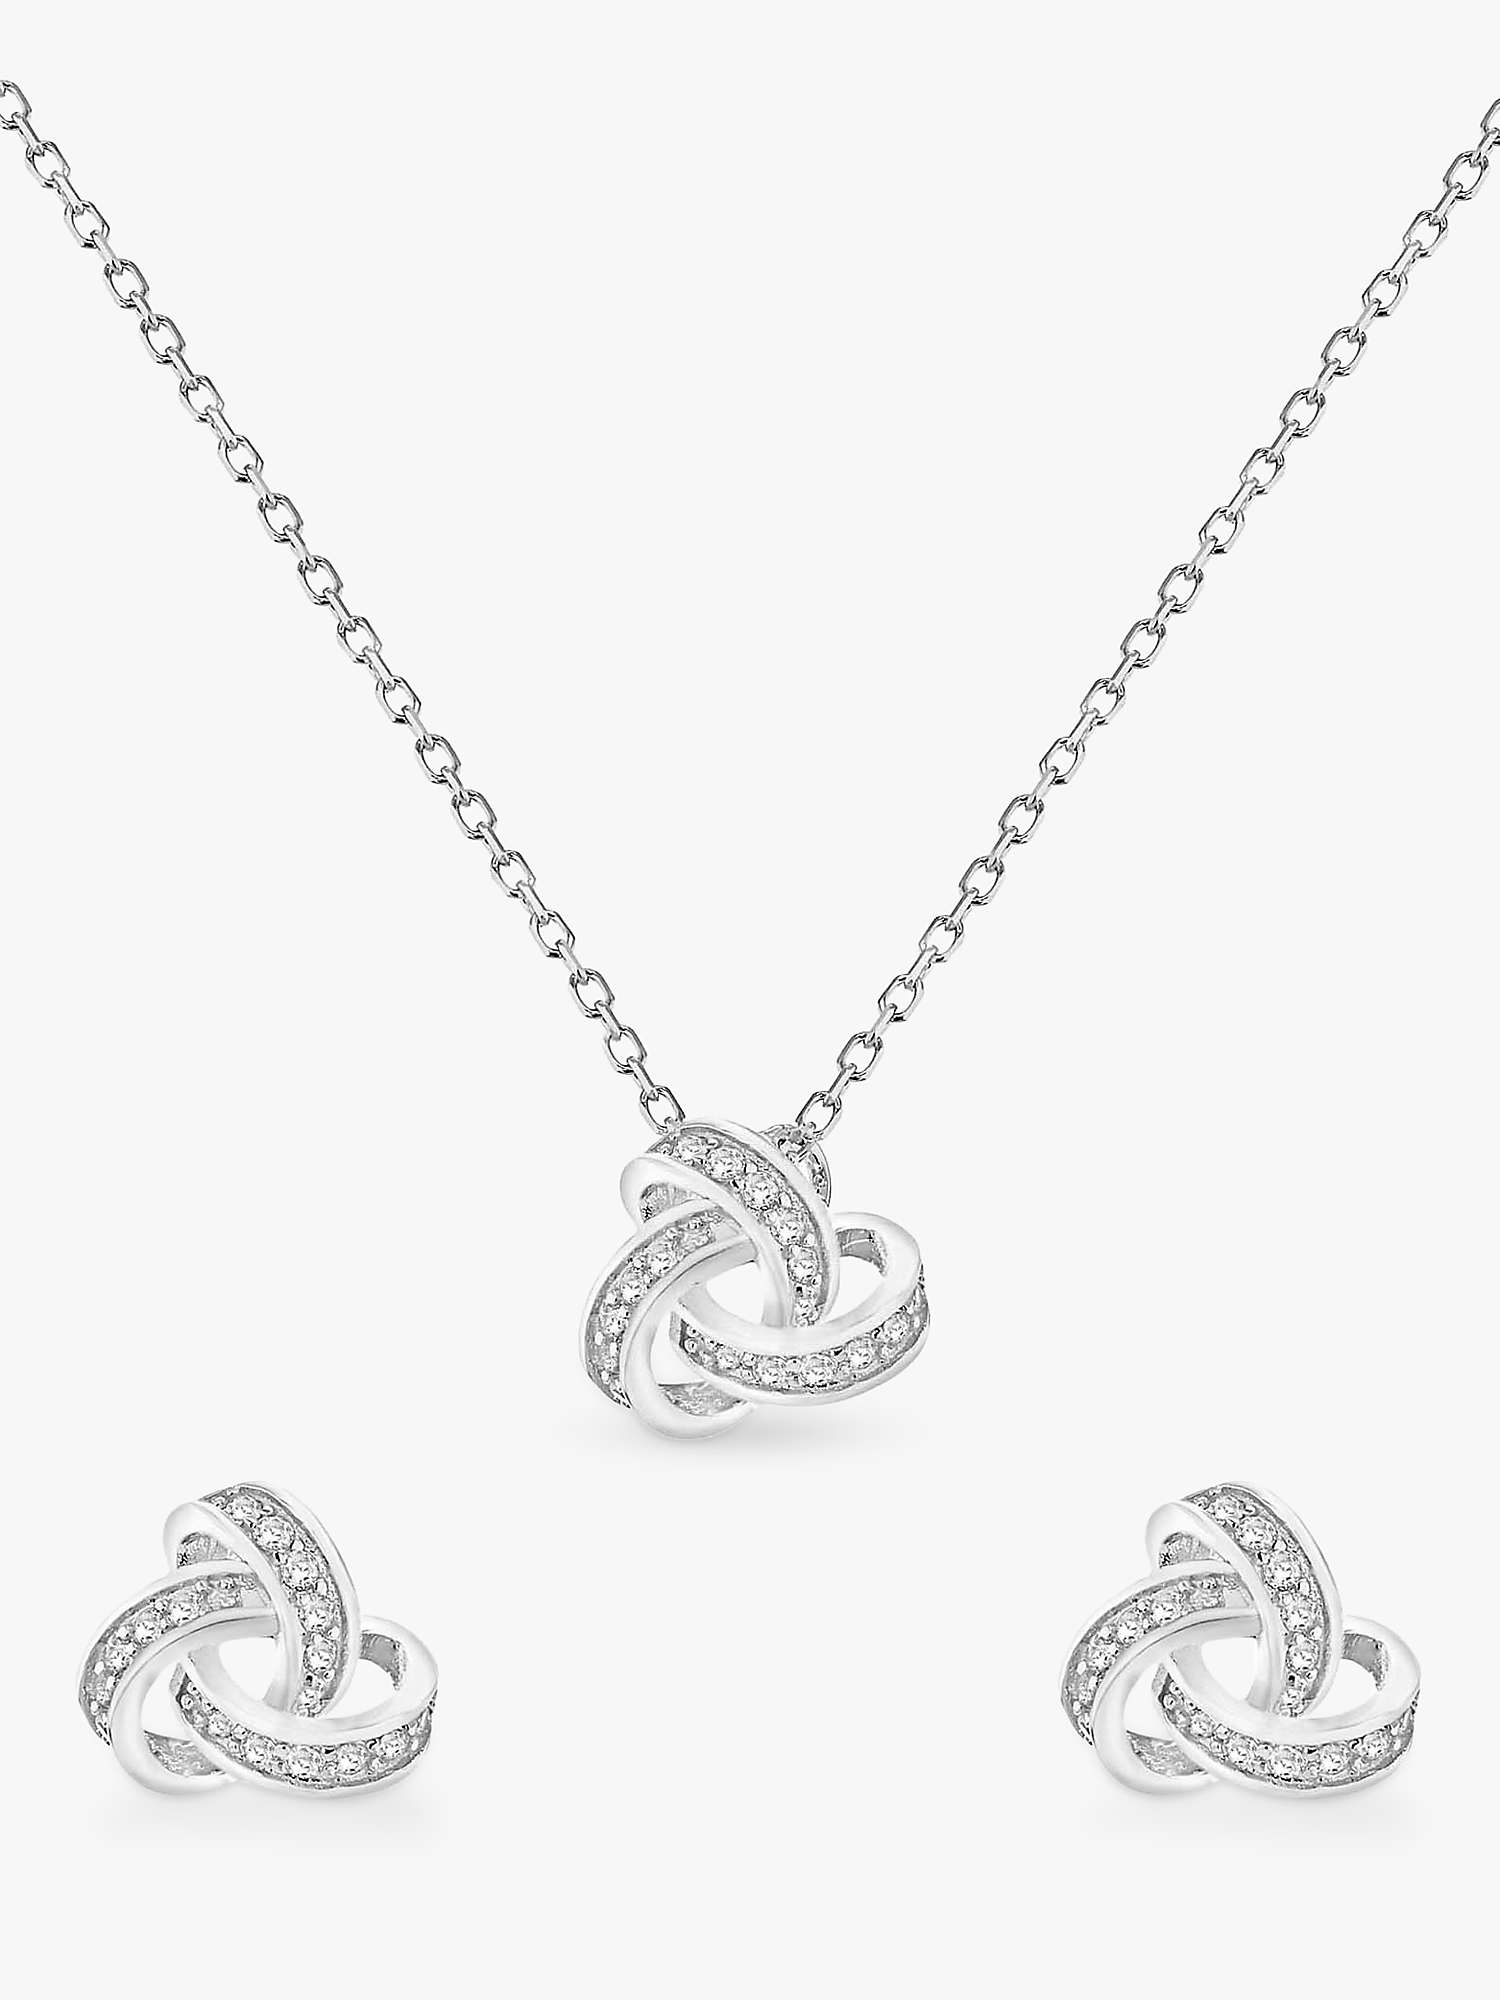 Buy IBB Sterling Silver Cubic Zirconia Knot Earrings & Necklace Gift Set Online at johnlewis.com